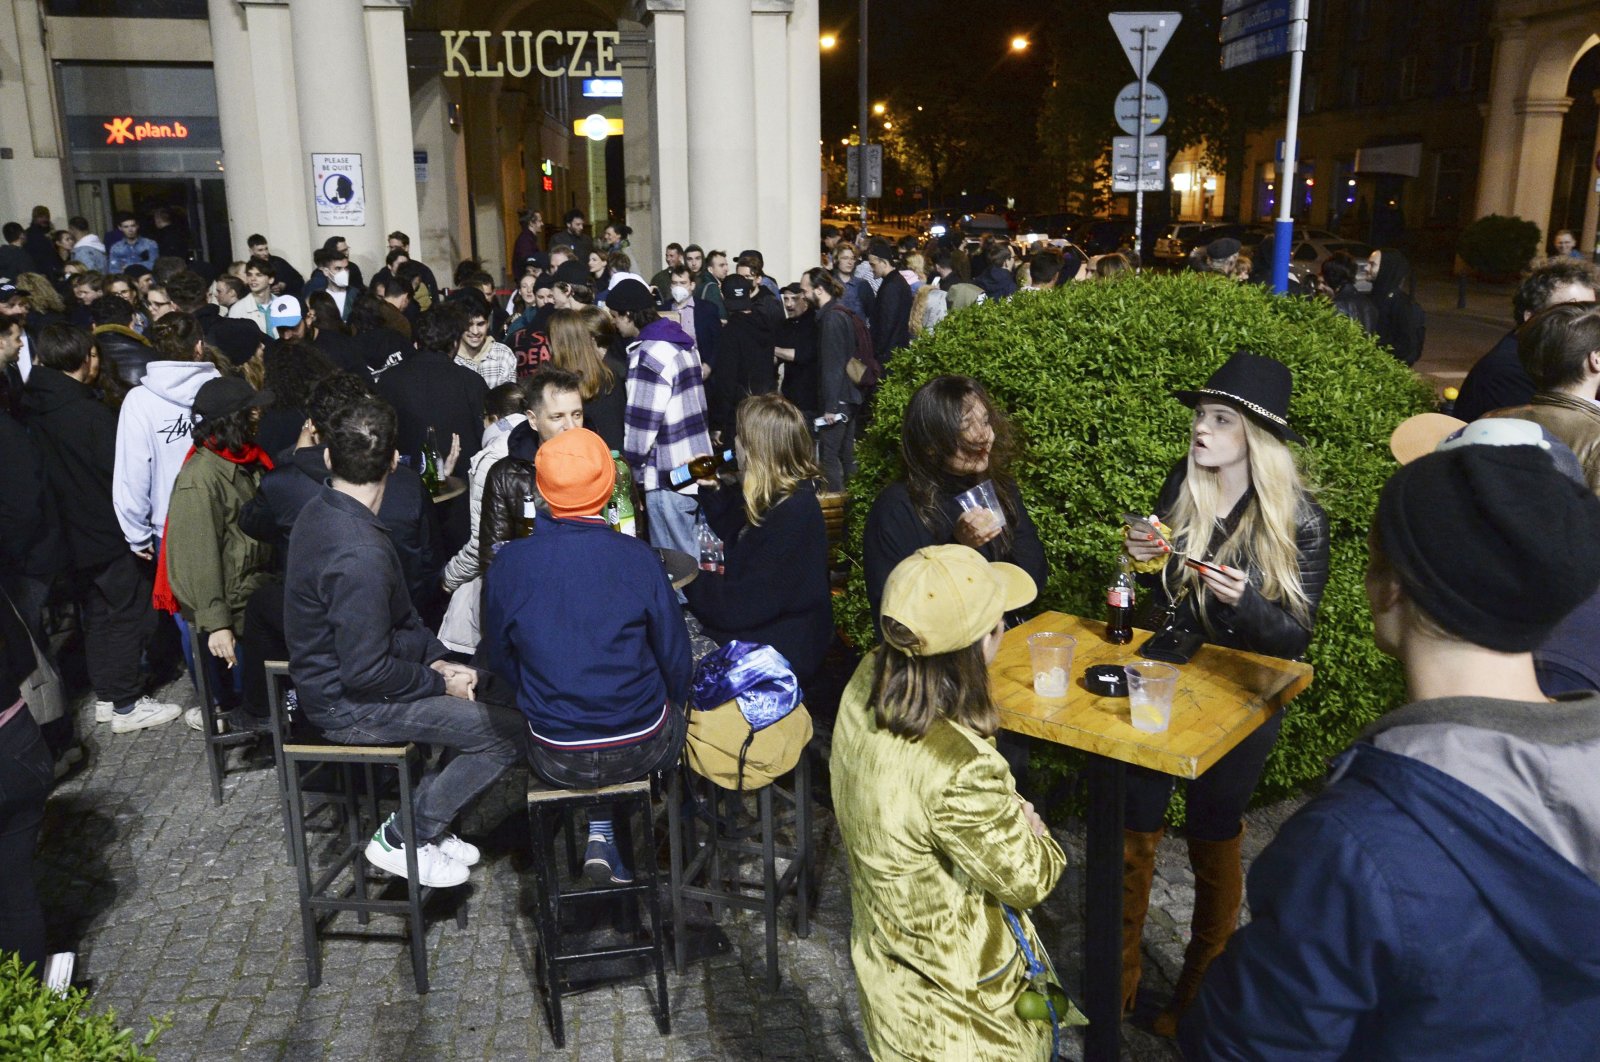 Poland rejoices as restaurants reopen, mask rules are relaxed | Daily Sabah